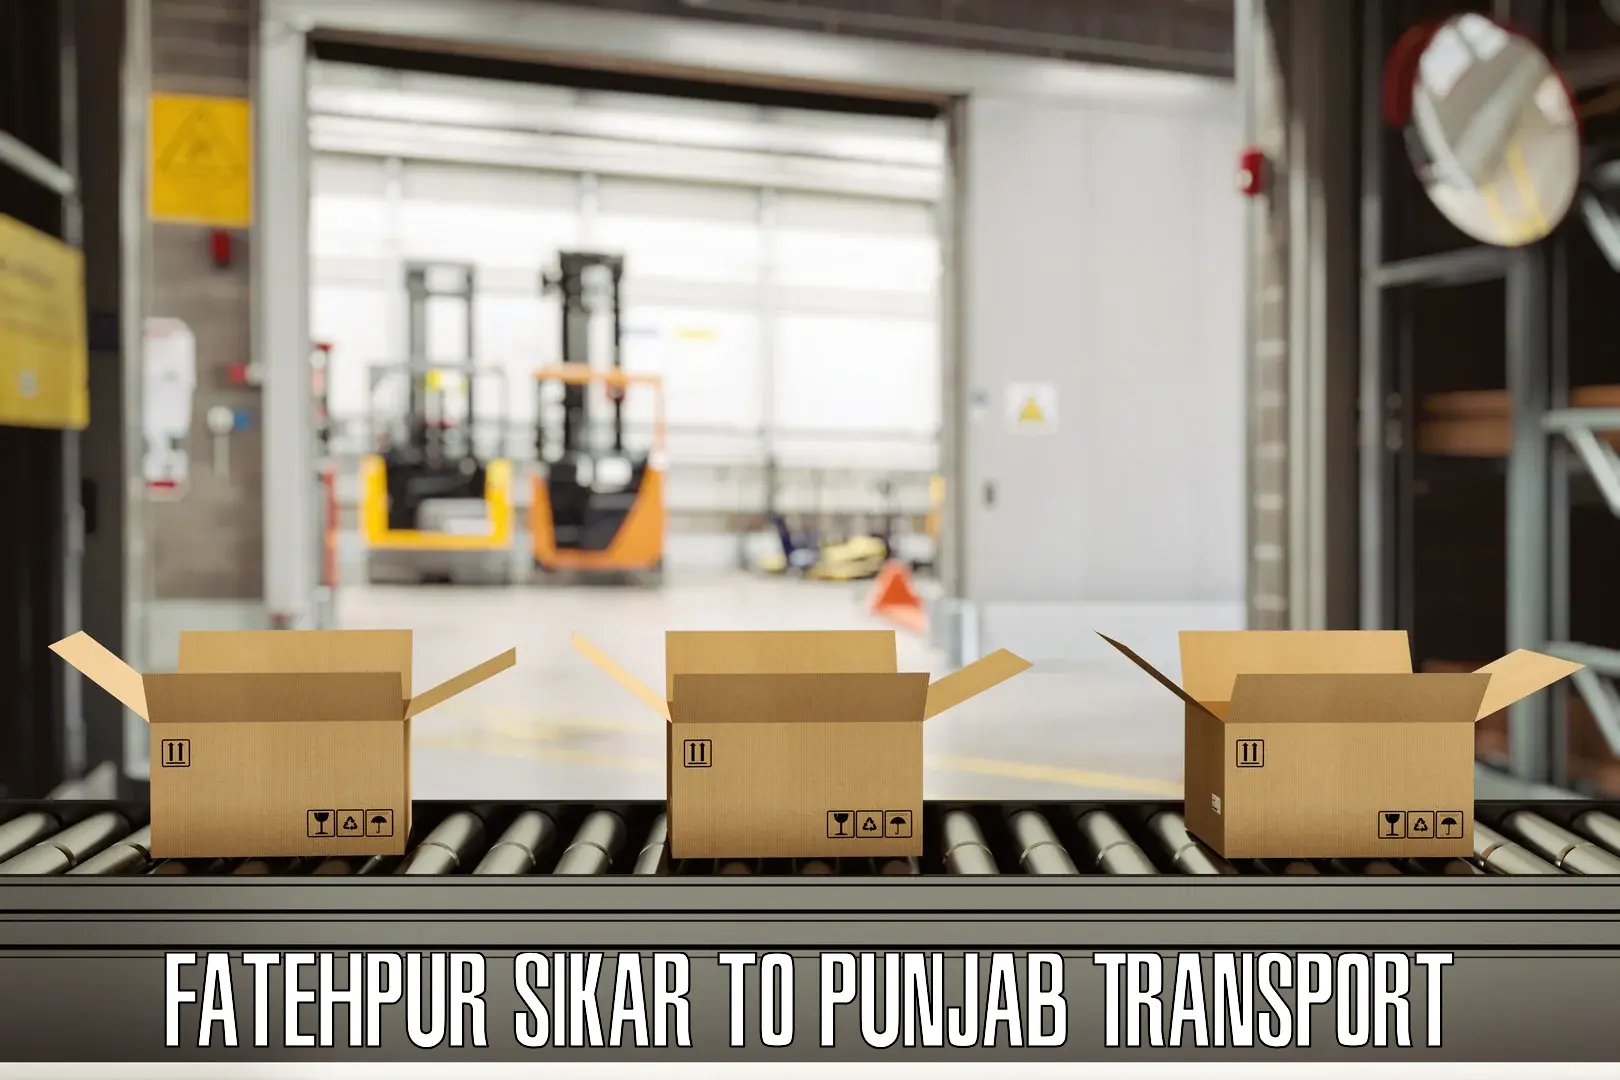 Container transportation services Fatehpur Sikar to Amritsar